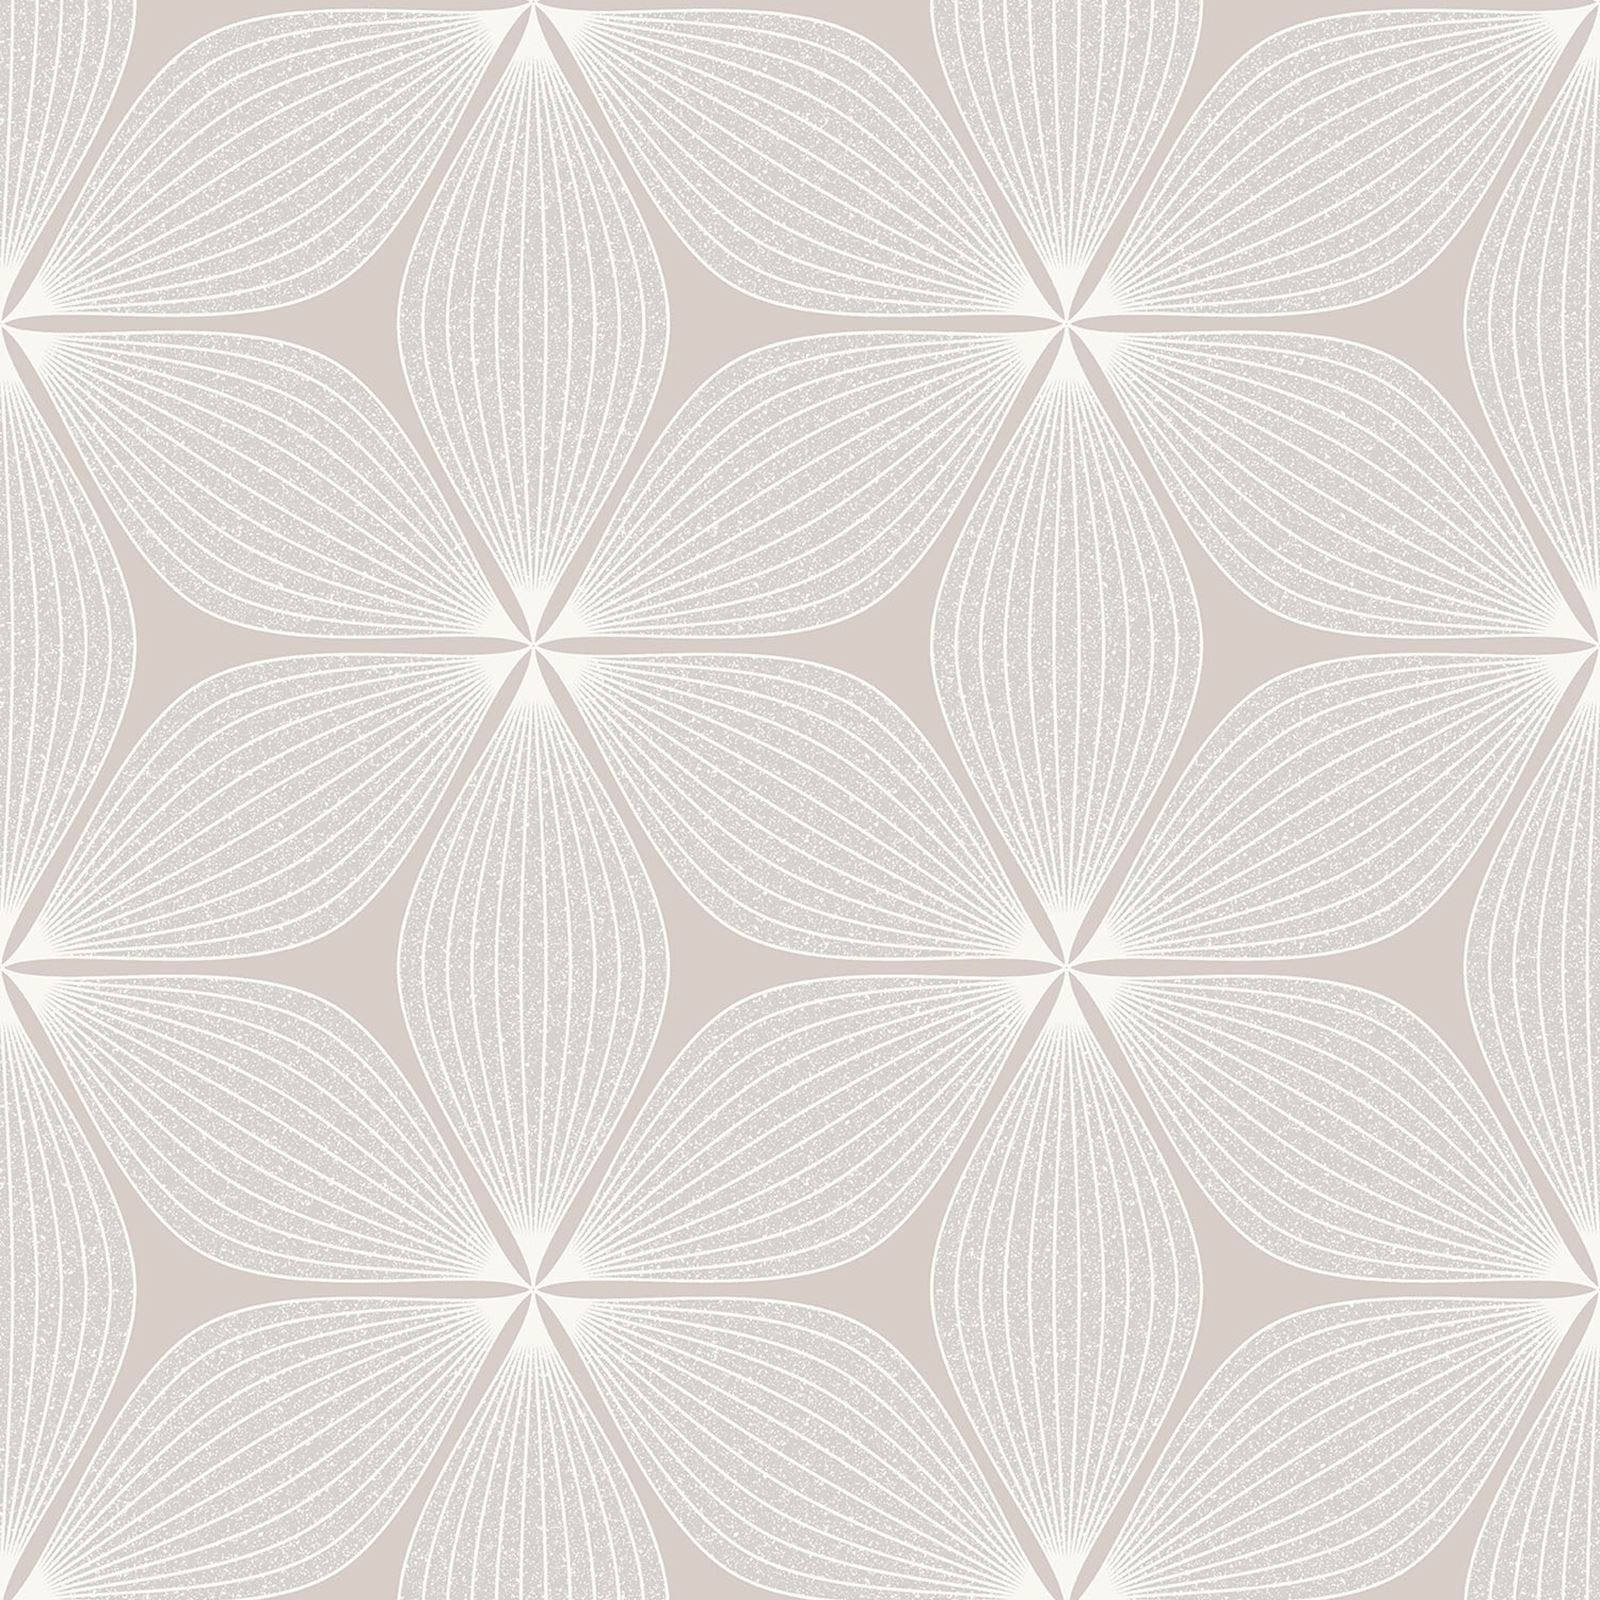 A rose, composed of geometric shapes Wallpaper